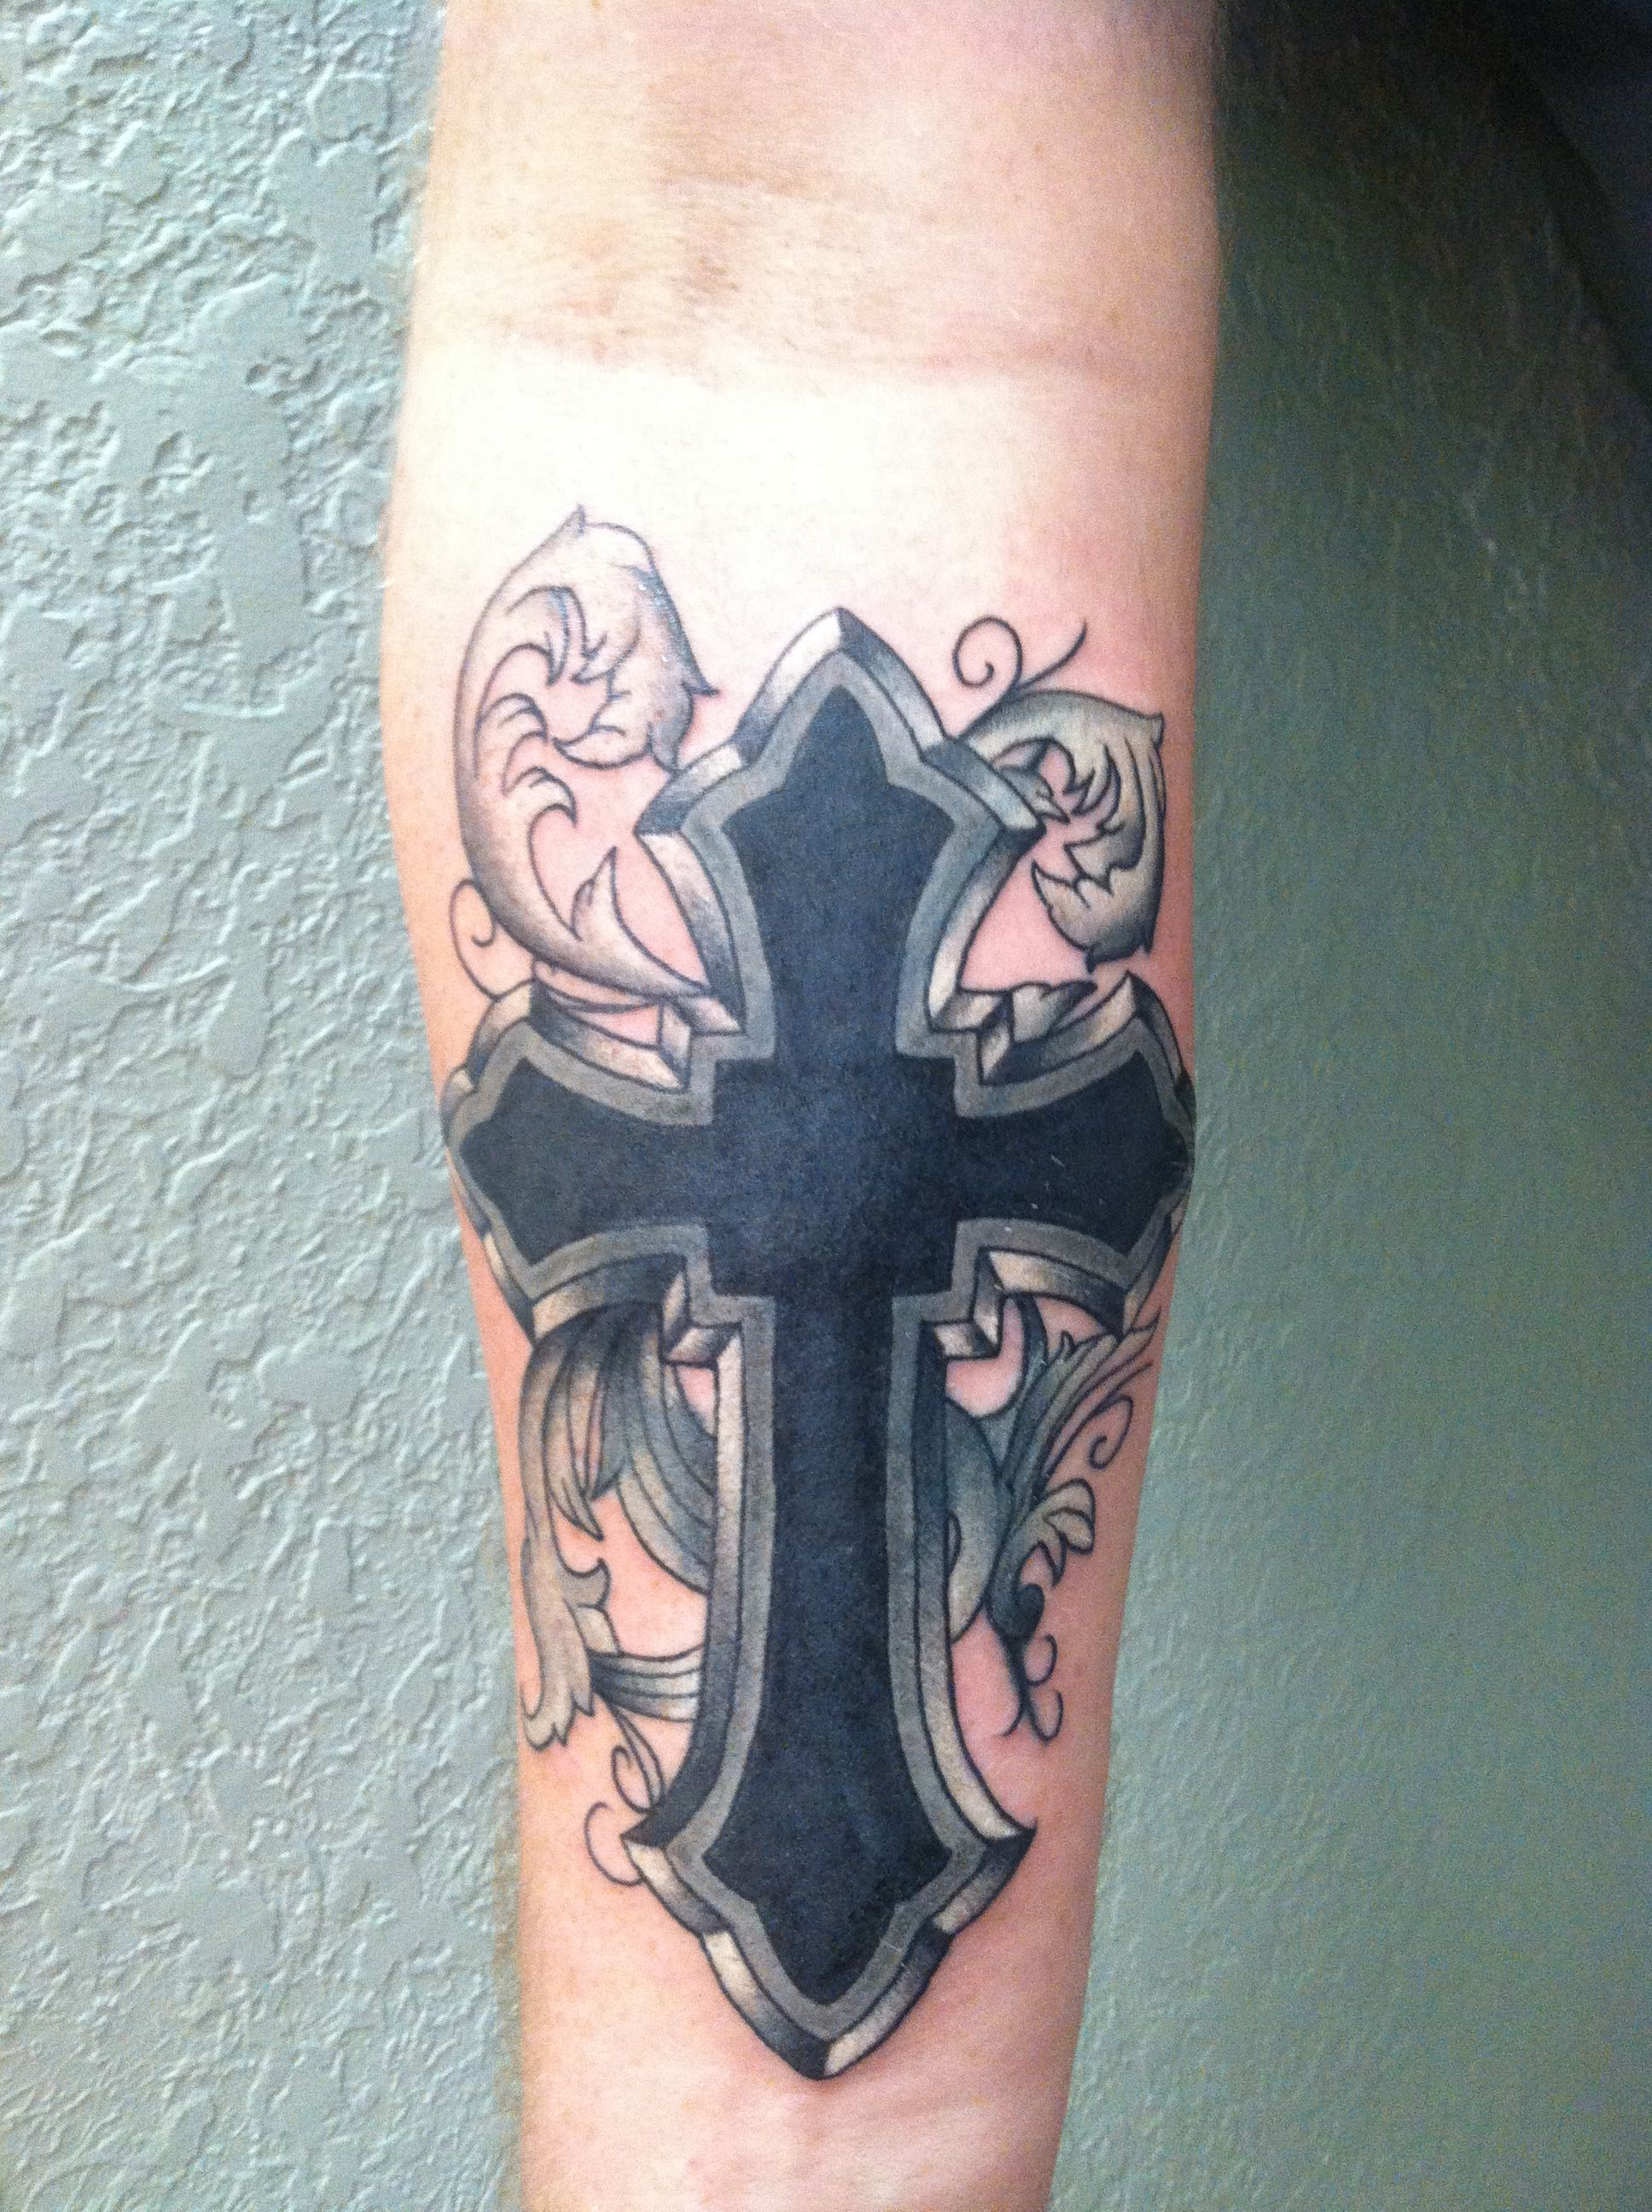 Tribal Cover Up Cross Tattoo Tattoos Binx Celtic Cross intended for dimensions 1936 X 2592